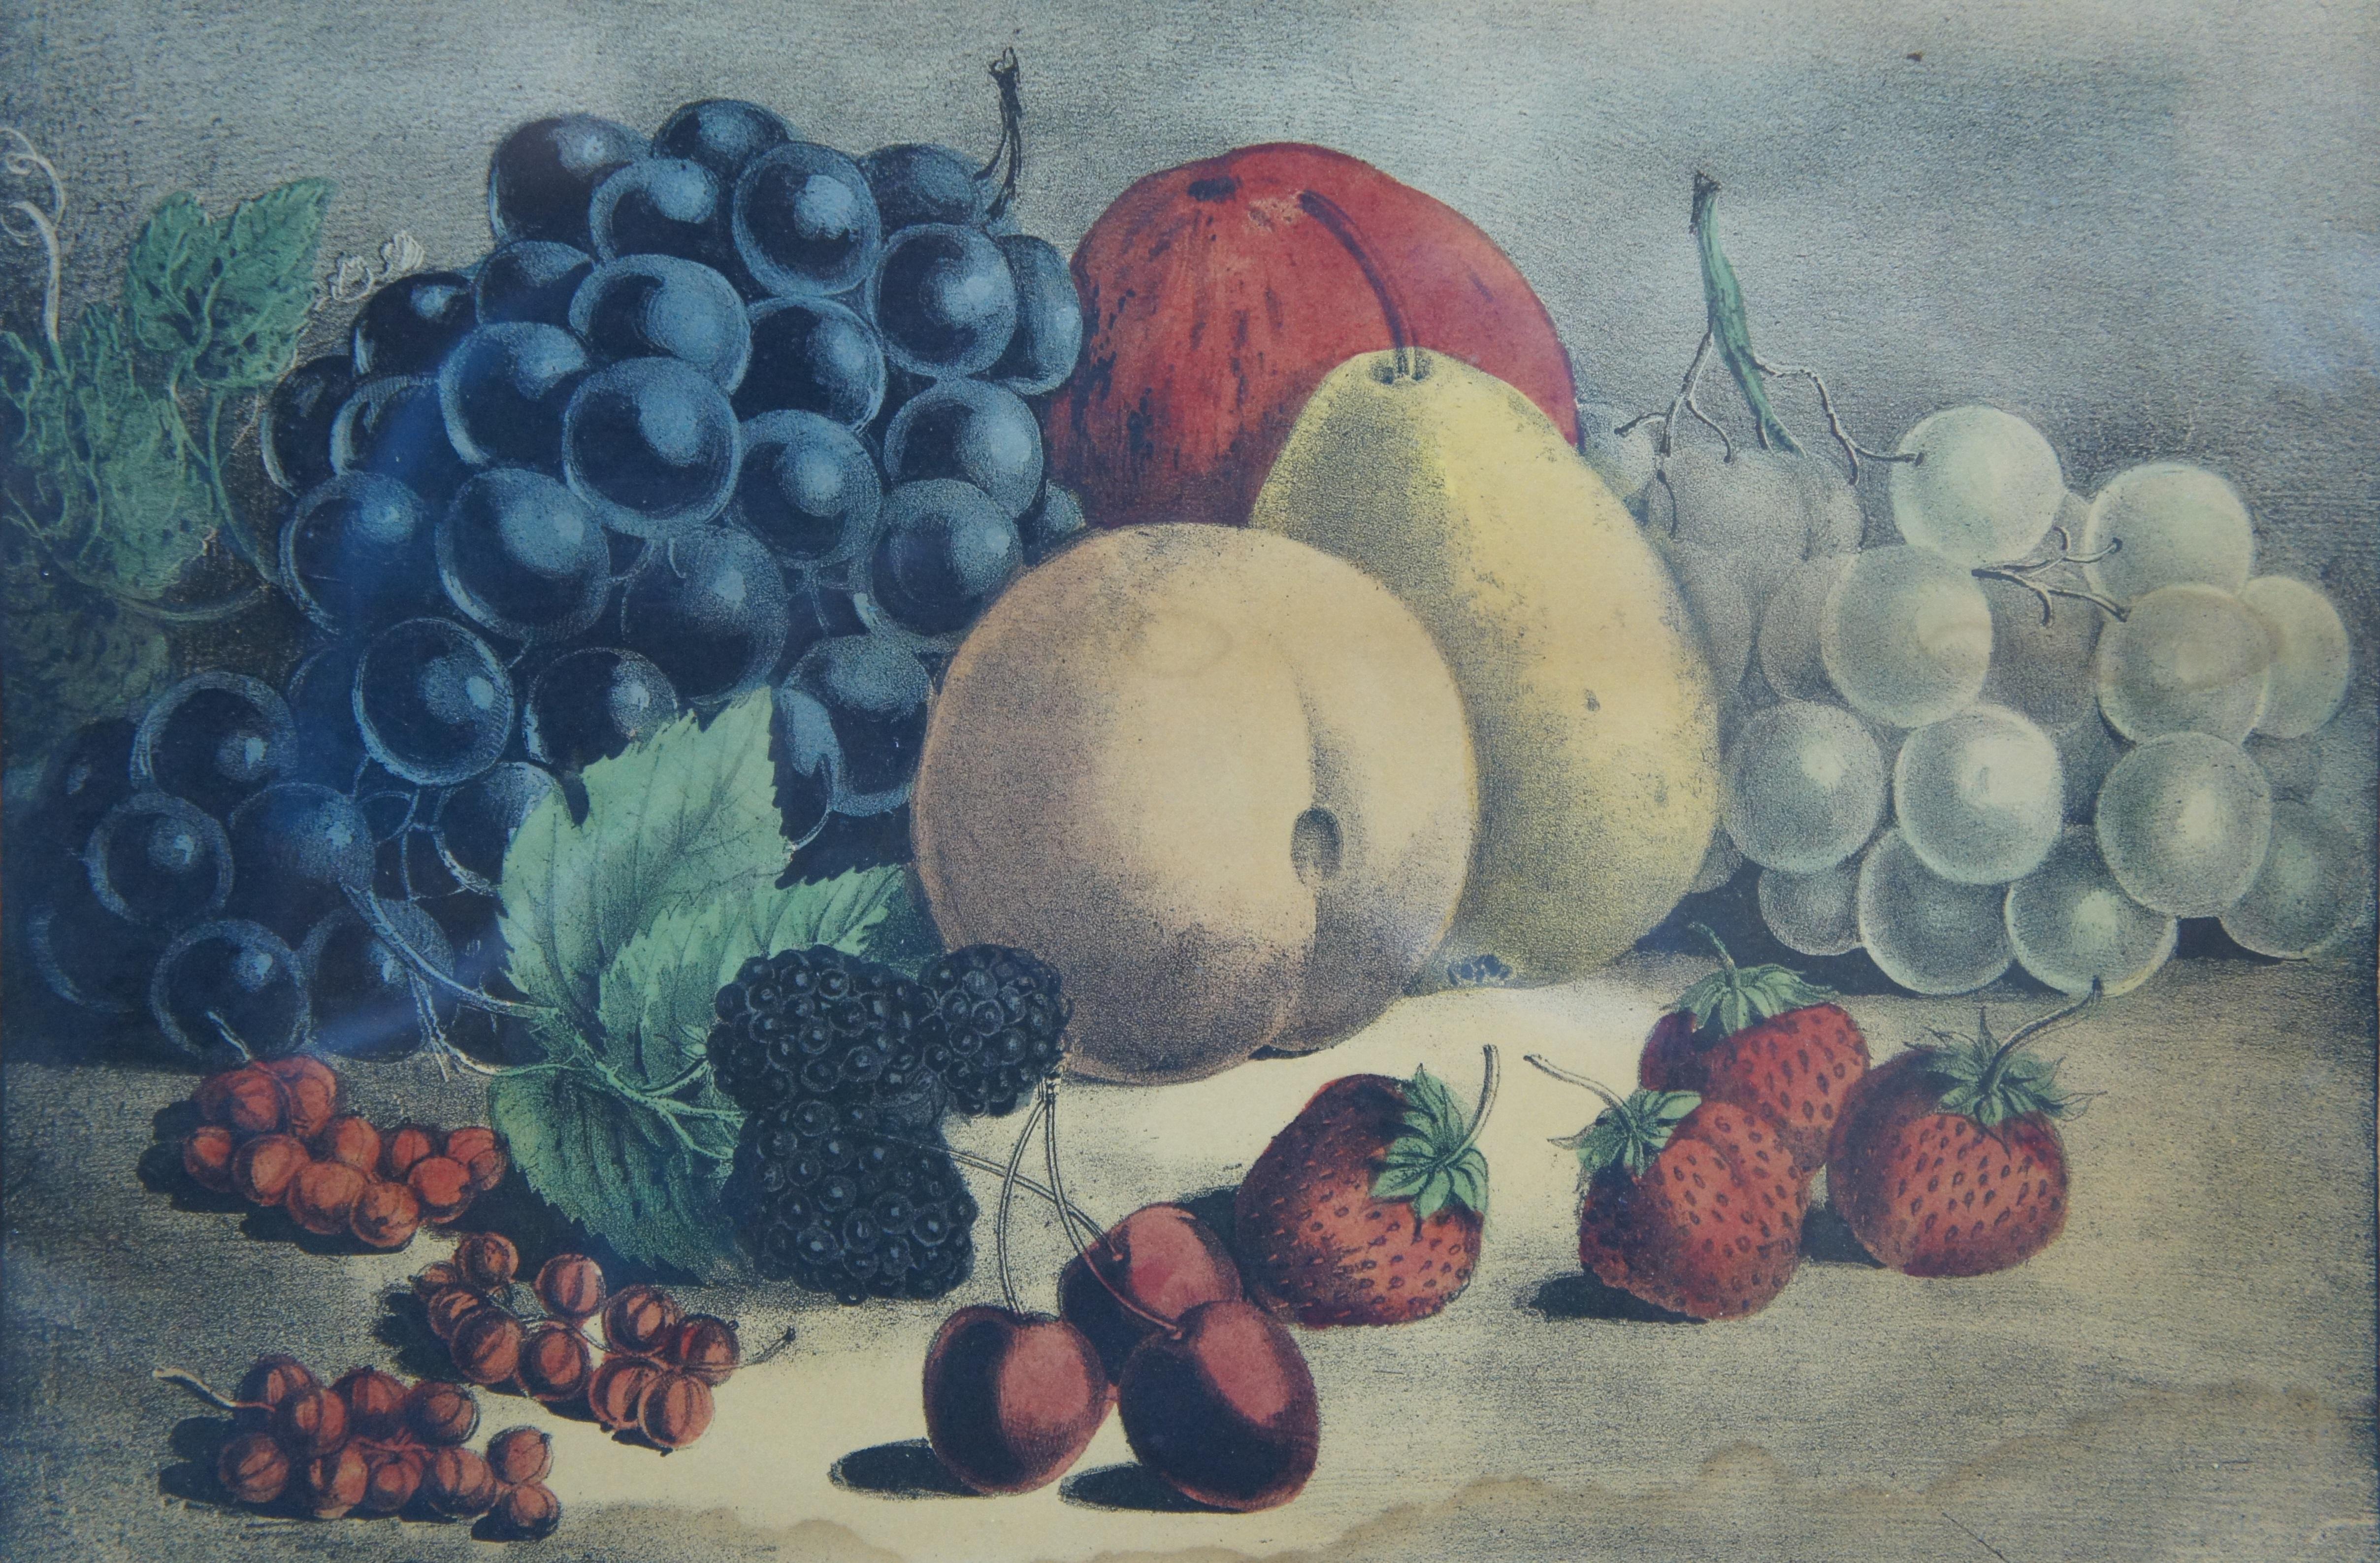 Paper 1872 Antique Currier Ives Still Life Lithograph Print Fruits of the Seasons